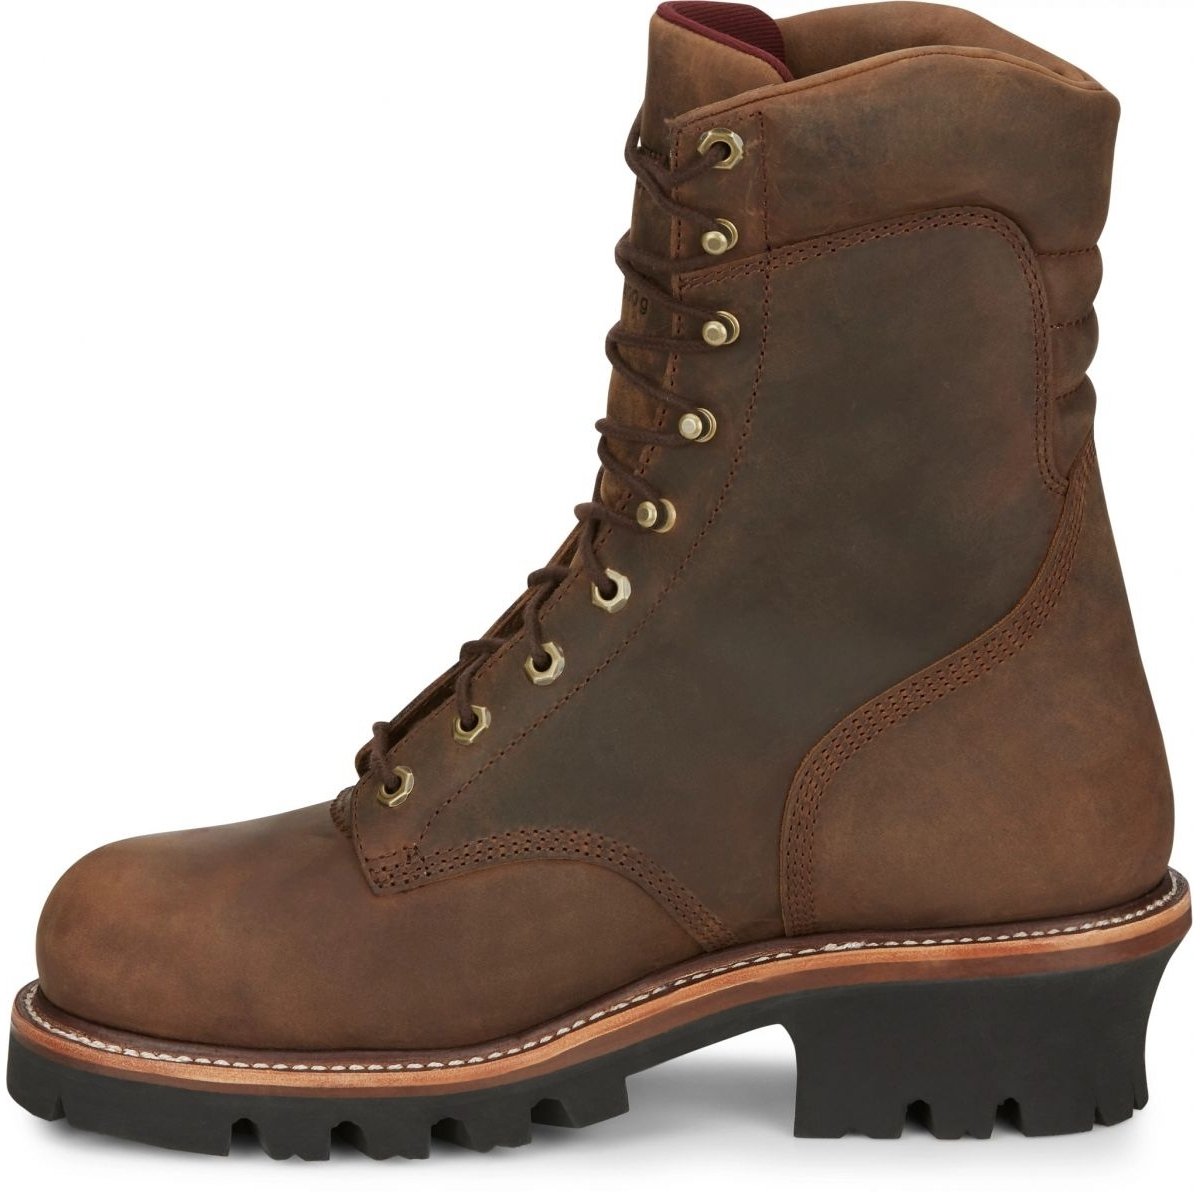 Chippewa Men's 9 Super DNA Steel Toe Waterproof Insulated Logger Work Boot Bay Apache - 59405 ONE SIZE BROWN - BROWN, 11.5 Wide